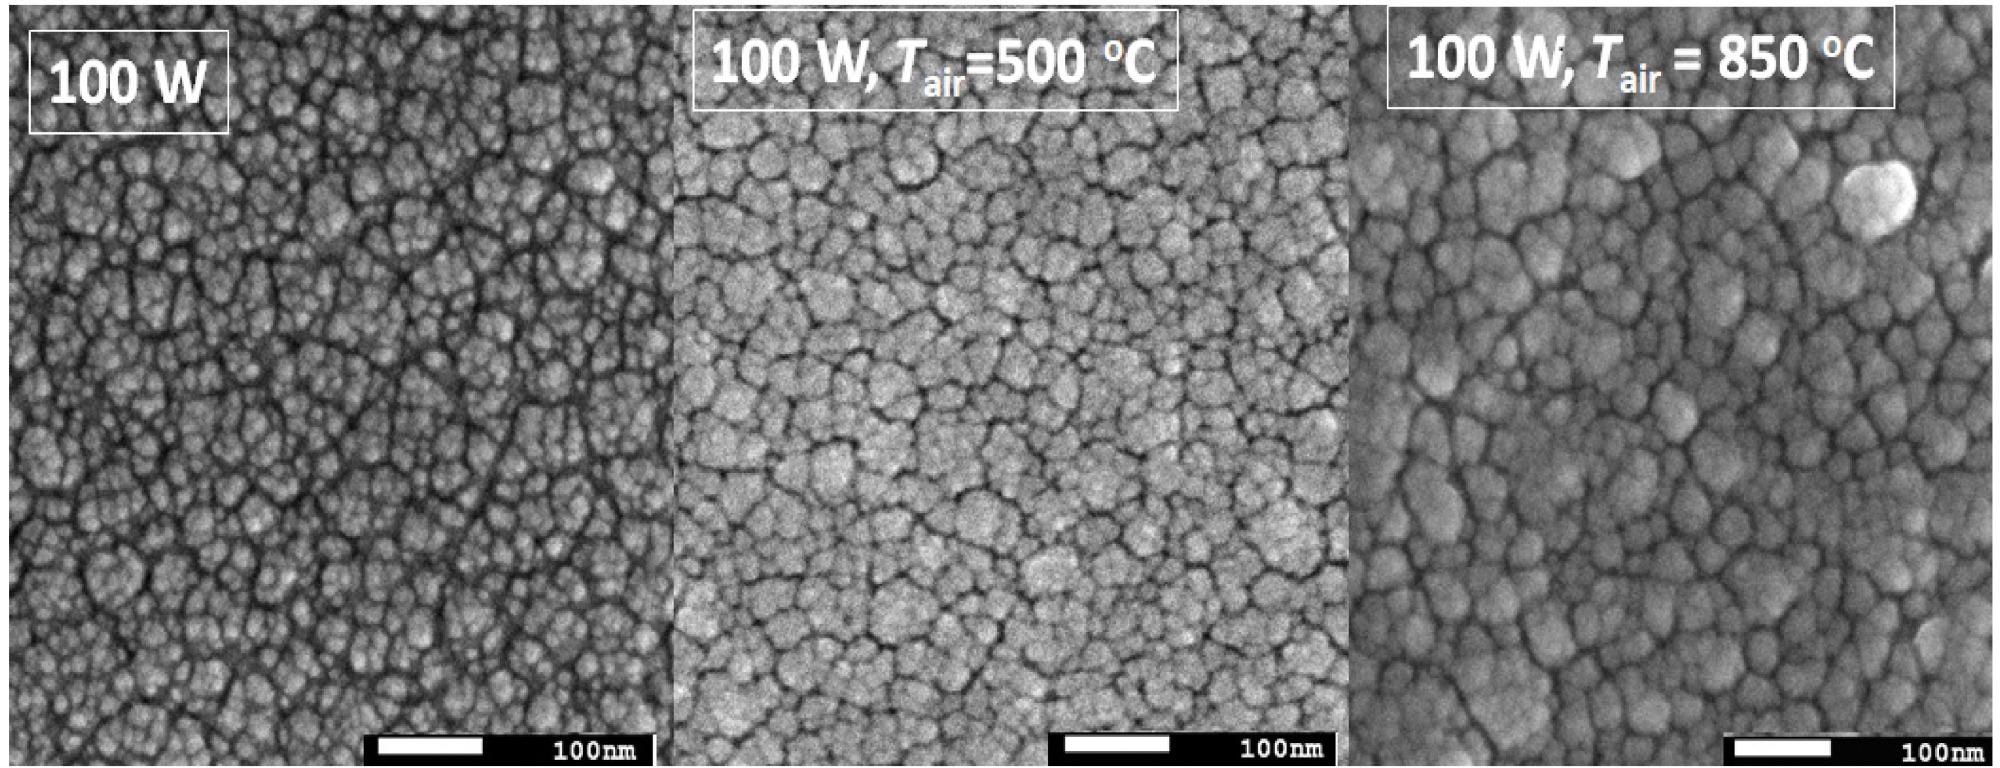 SEM images of as-grown Zn-ferrite thin films (deposited at an RF power of 100 W), which were later annealed at 500 °C and 850 °C in the air.